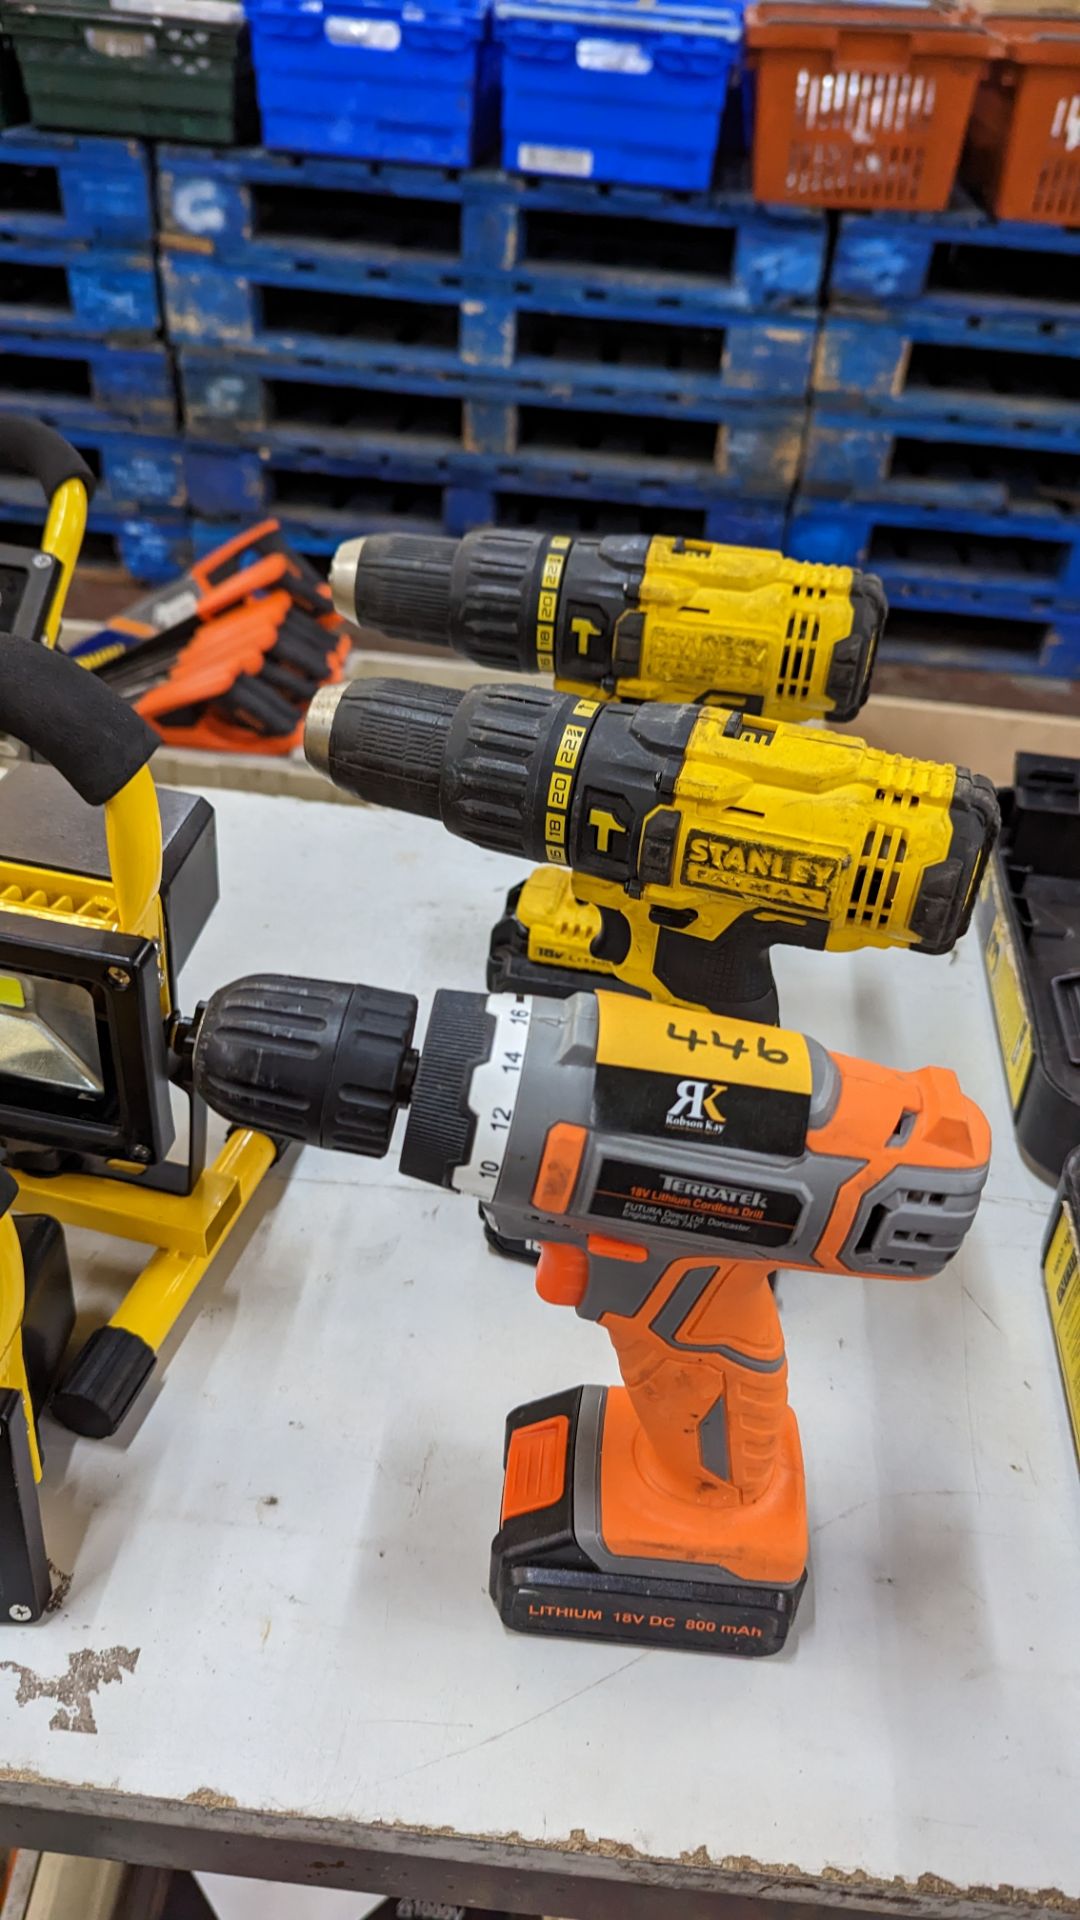 3 off 18 volt lithium cordless drills. Each drill includes an 18 volt lithium battery. This lot do